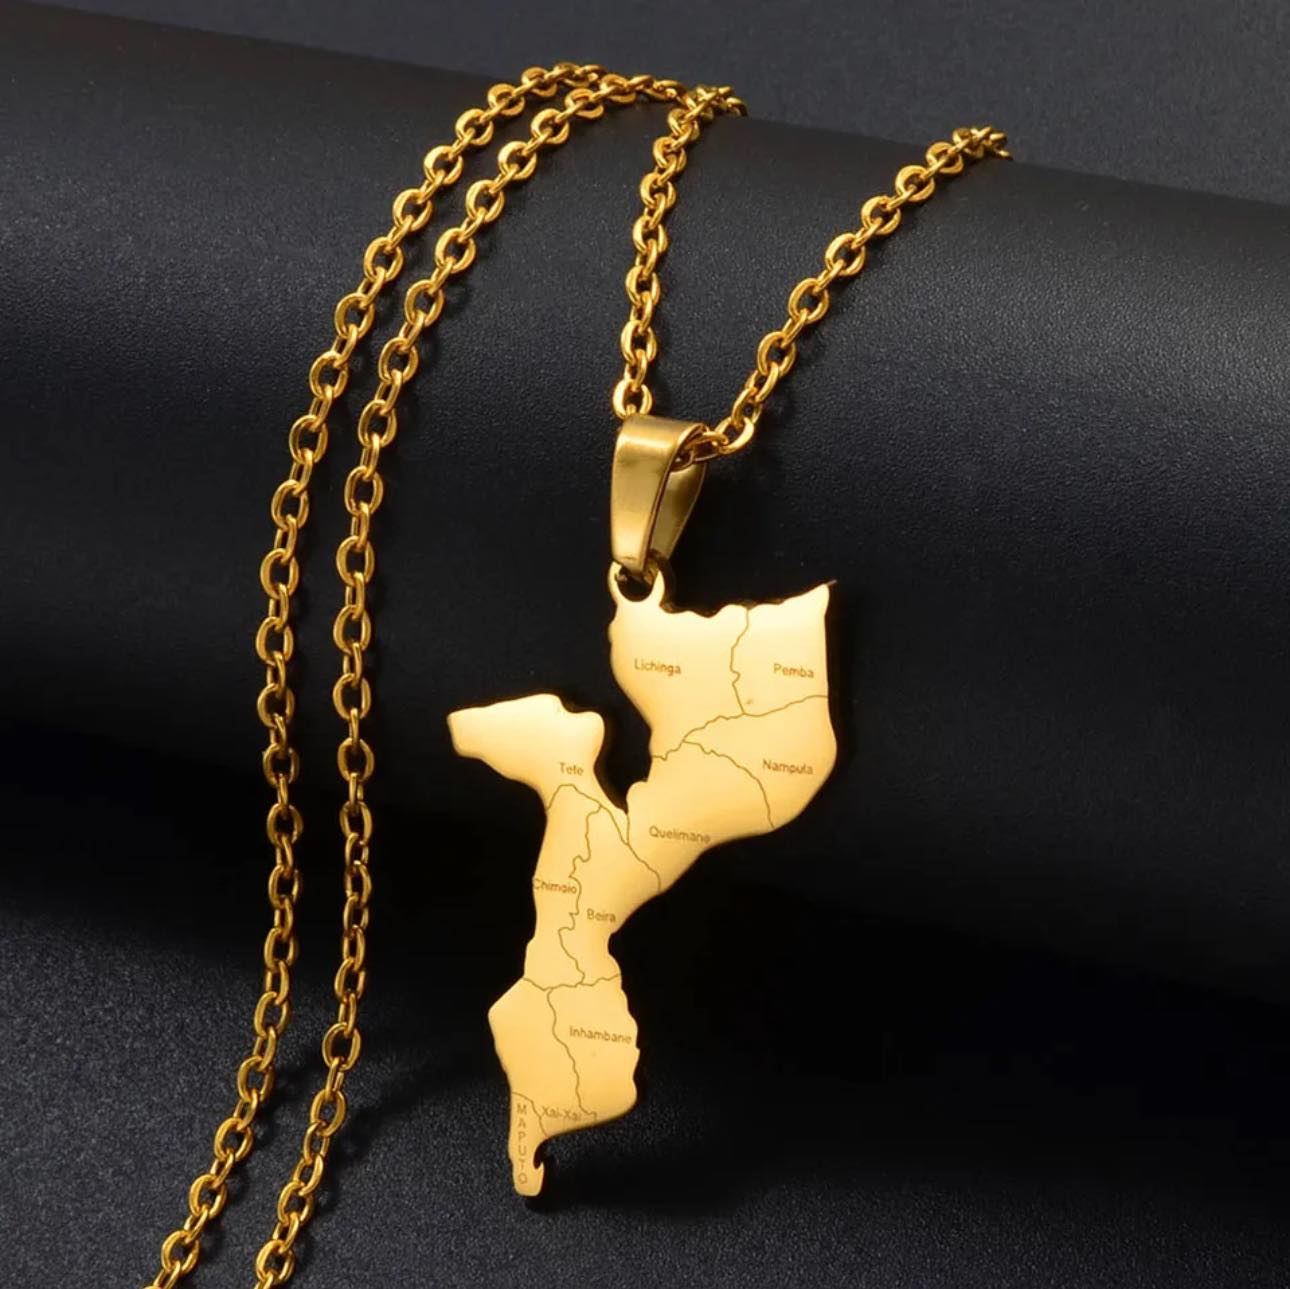 Mozambique Map & Cities Necklace